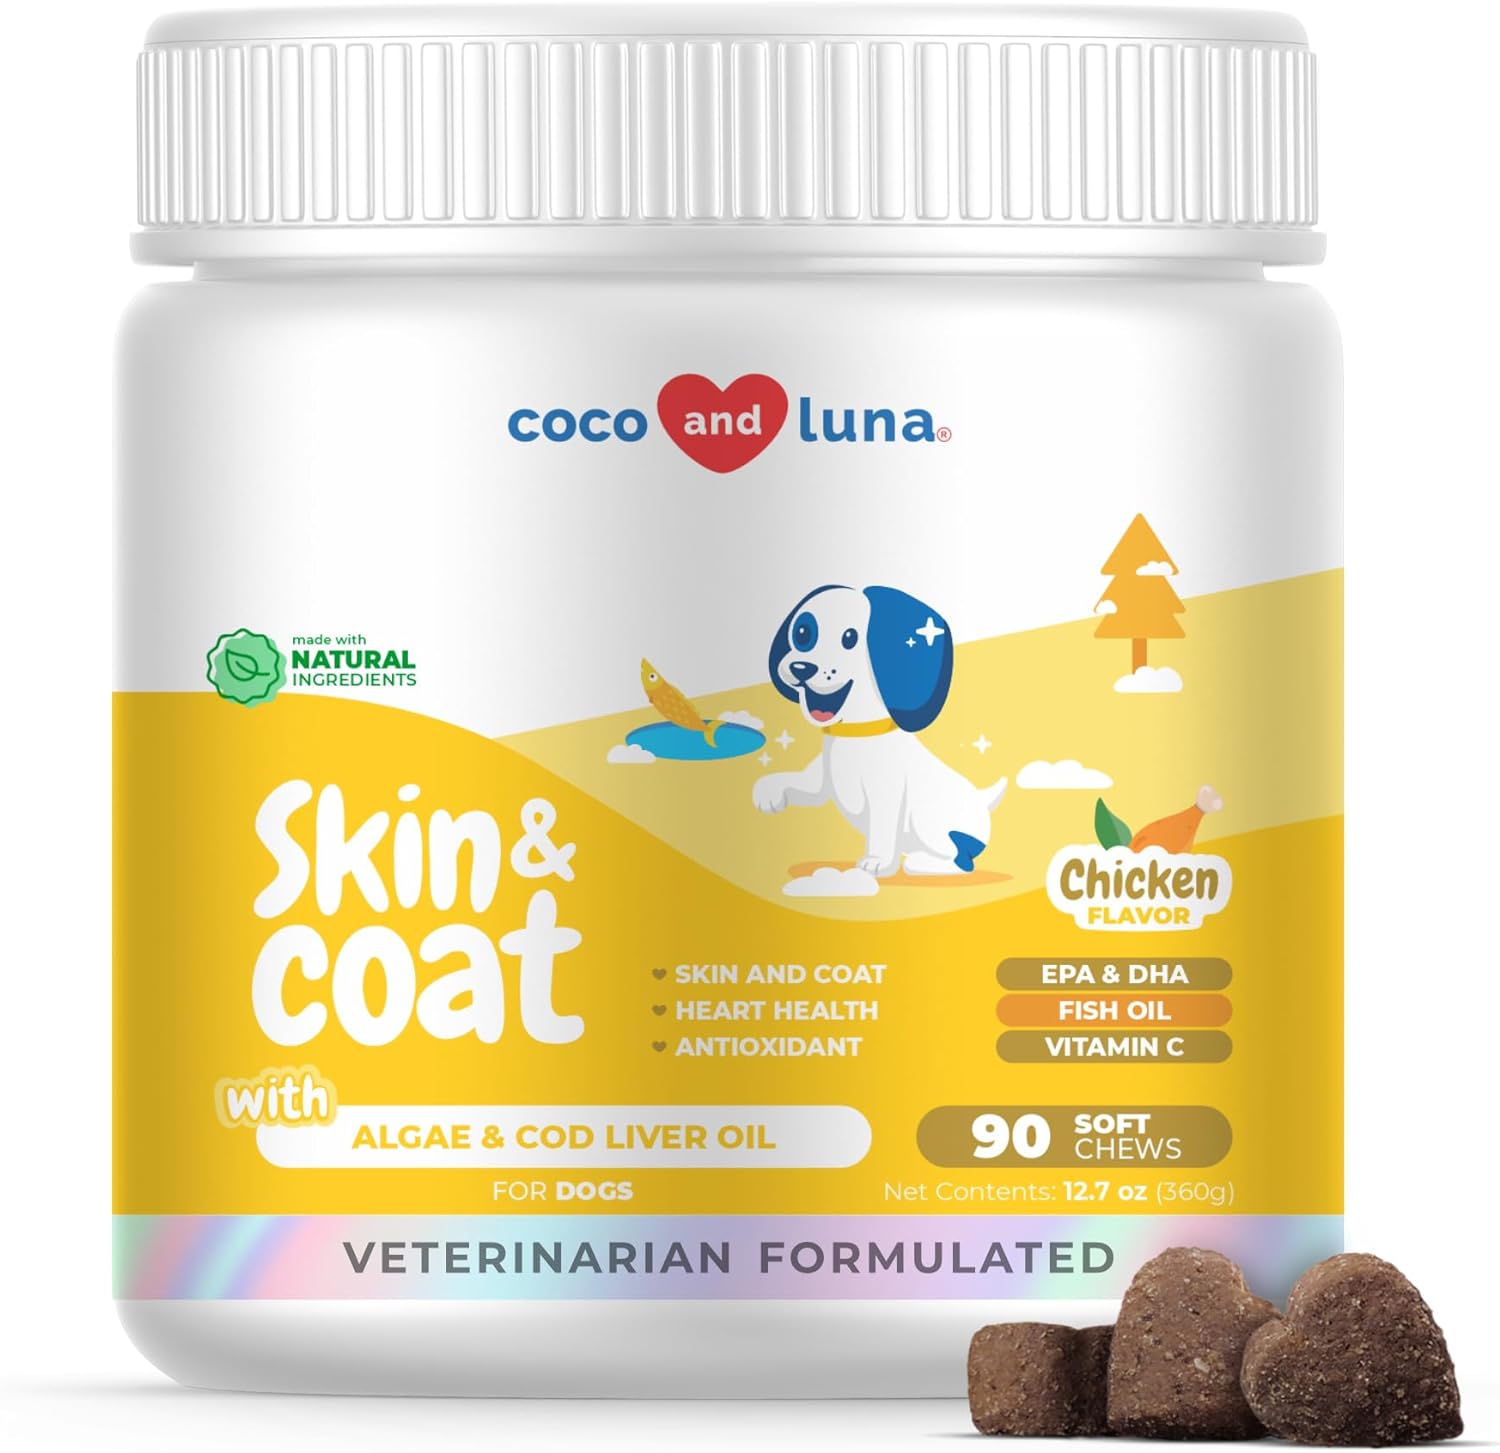 Omega 3 Fish Oil for Dogs - 90 Soft Chews - with Cod Liver Oil, Algae Oil, EPA & DHA Fatty Acids for Dog Shedding, Itchy, Dry Skin, Joint & Heart Support (Soft Chews)